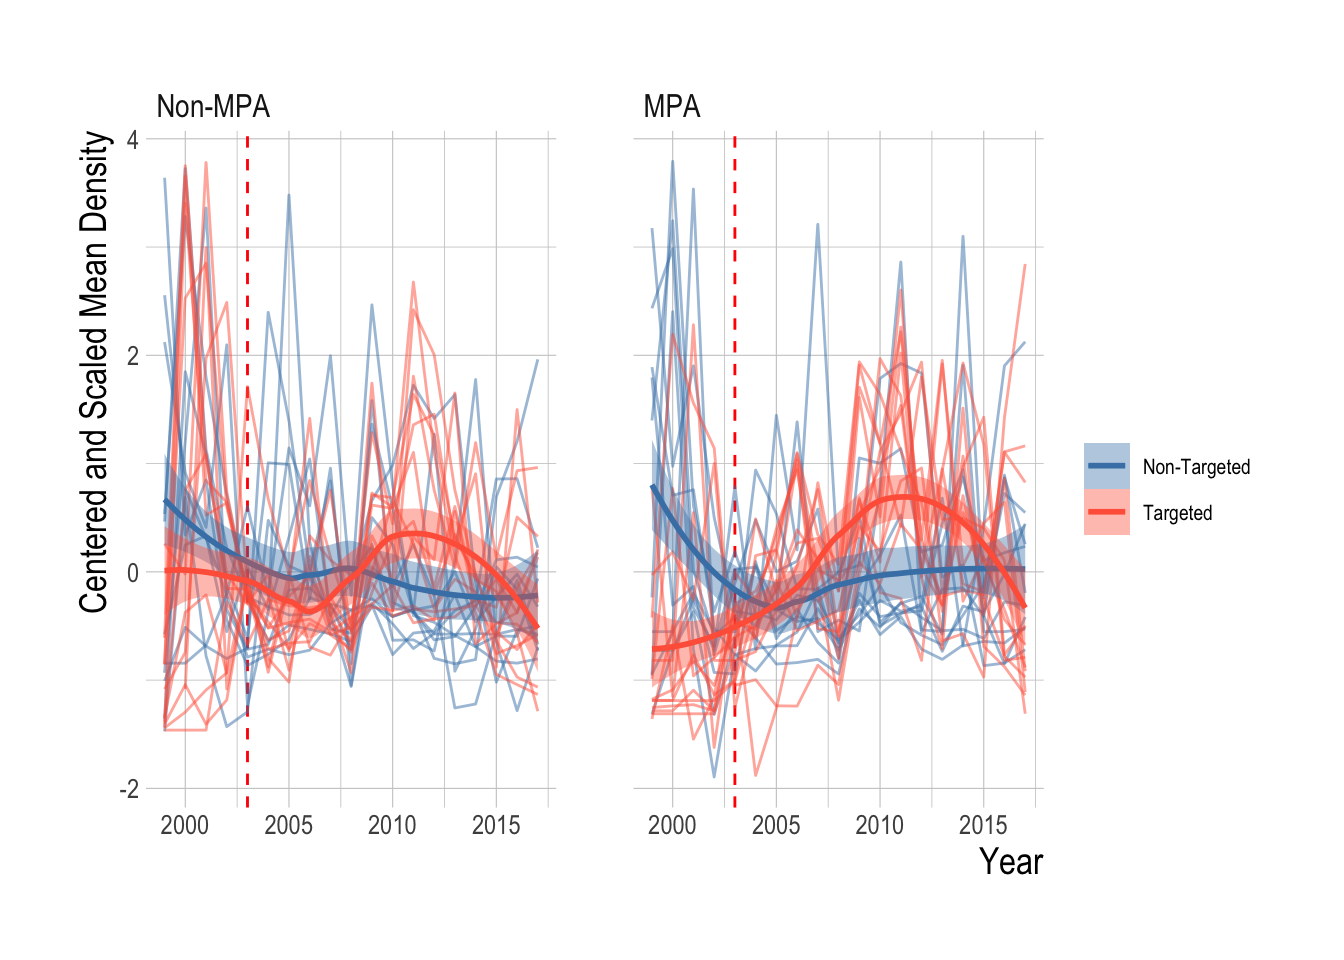 Centered and scaled biomass density trends for each fish grouped by targeted and non targeted (pale lines) and fitted LOESS smoother (with 95% confidence intervals around mean) and mean by targeted and non-targeted groups, inside and outside od MPAs. Red dashed line indicates MPA implementation year